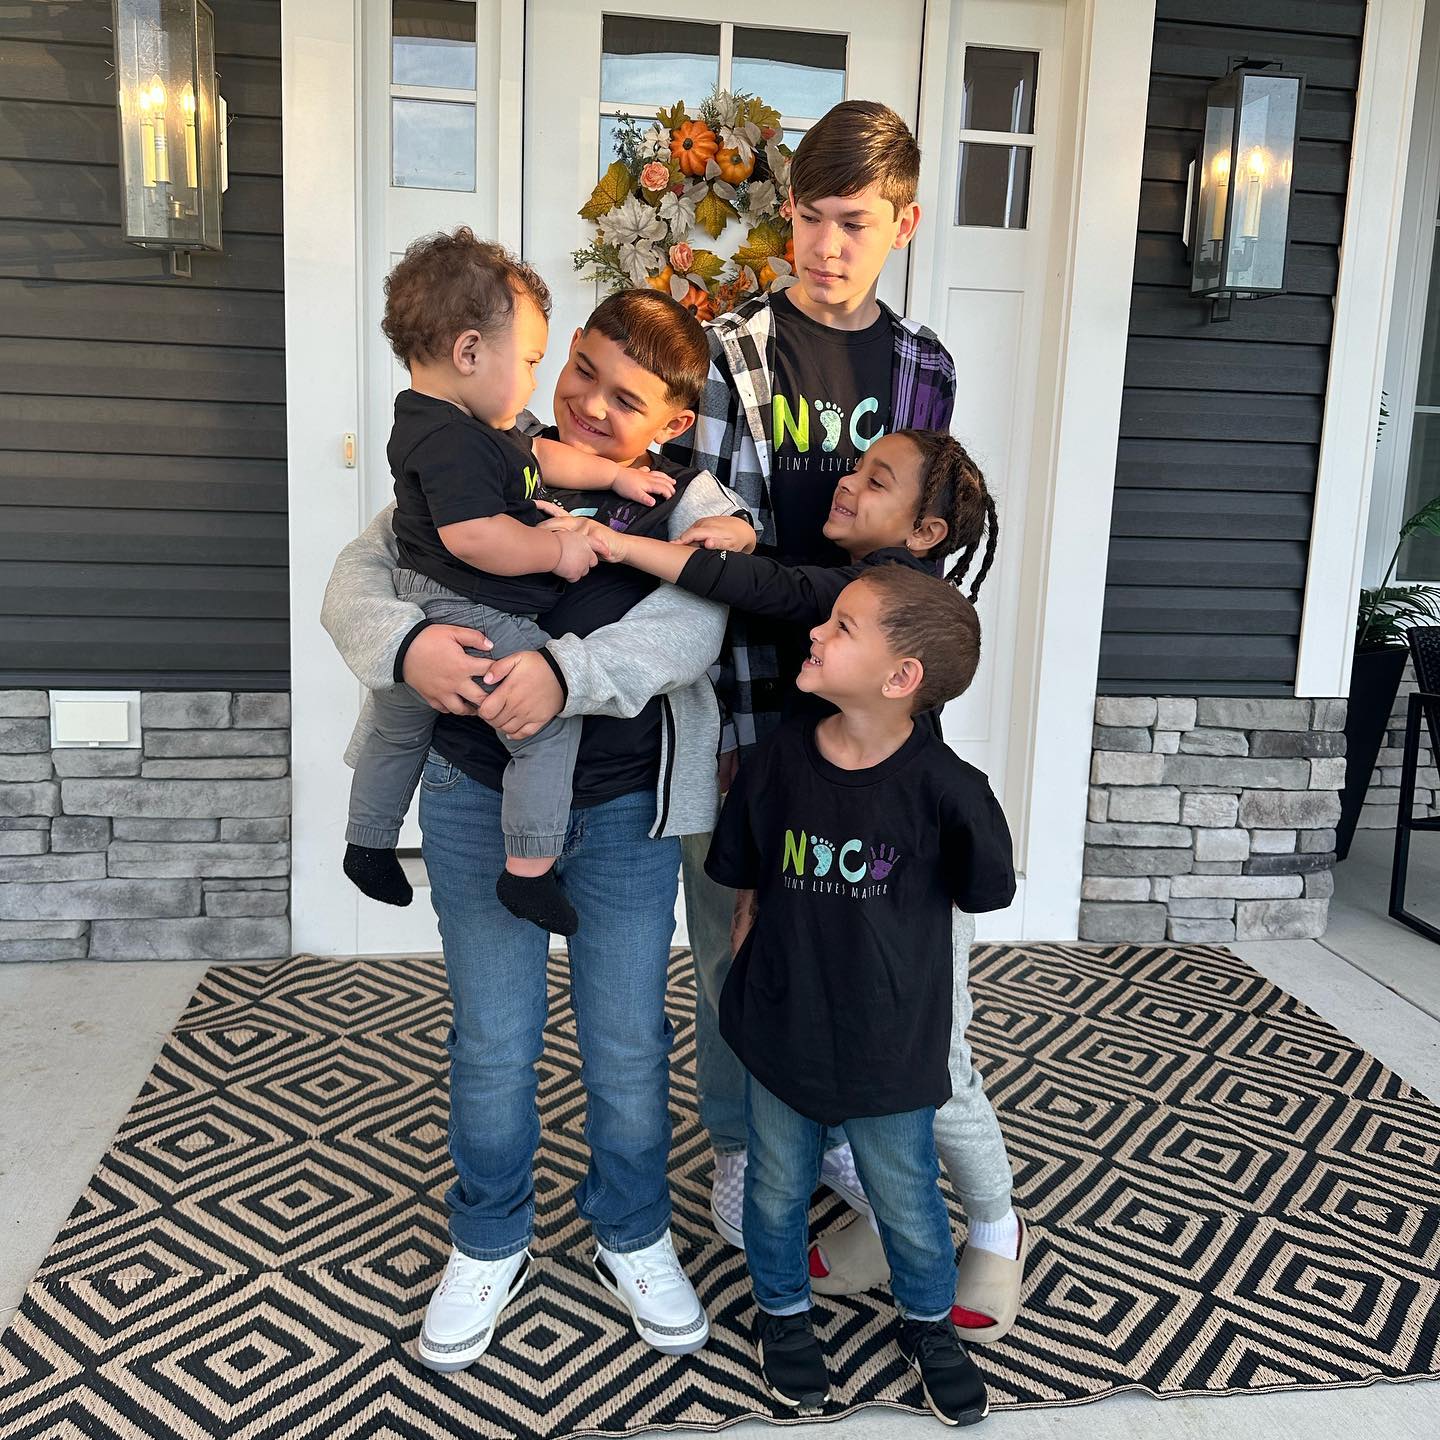 Kailyn gathered her five sons together for a group photo